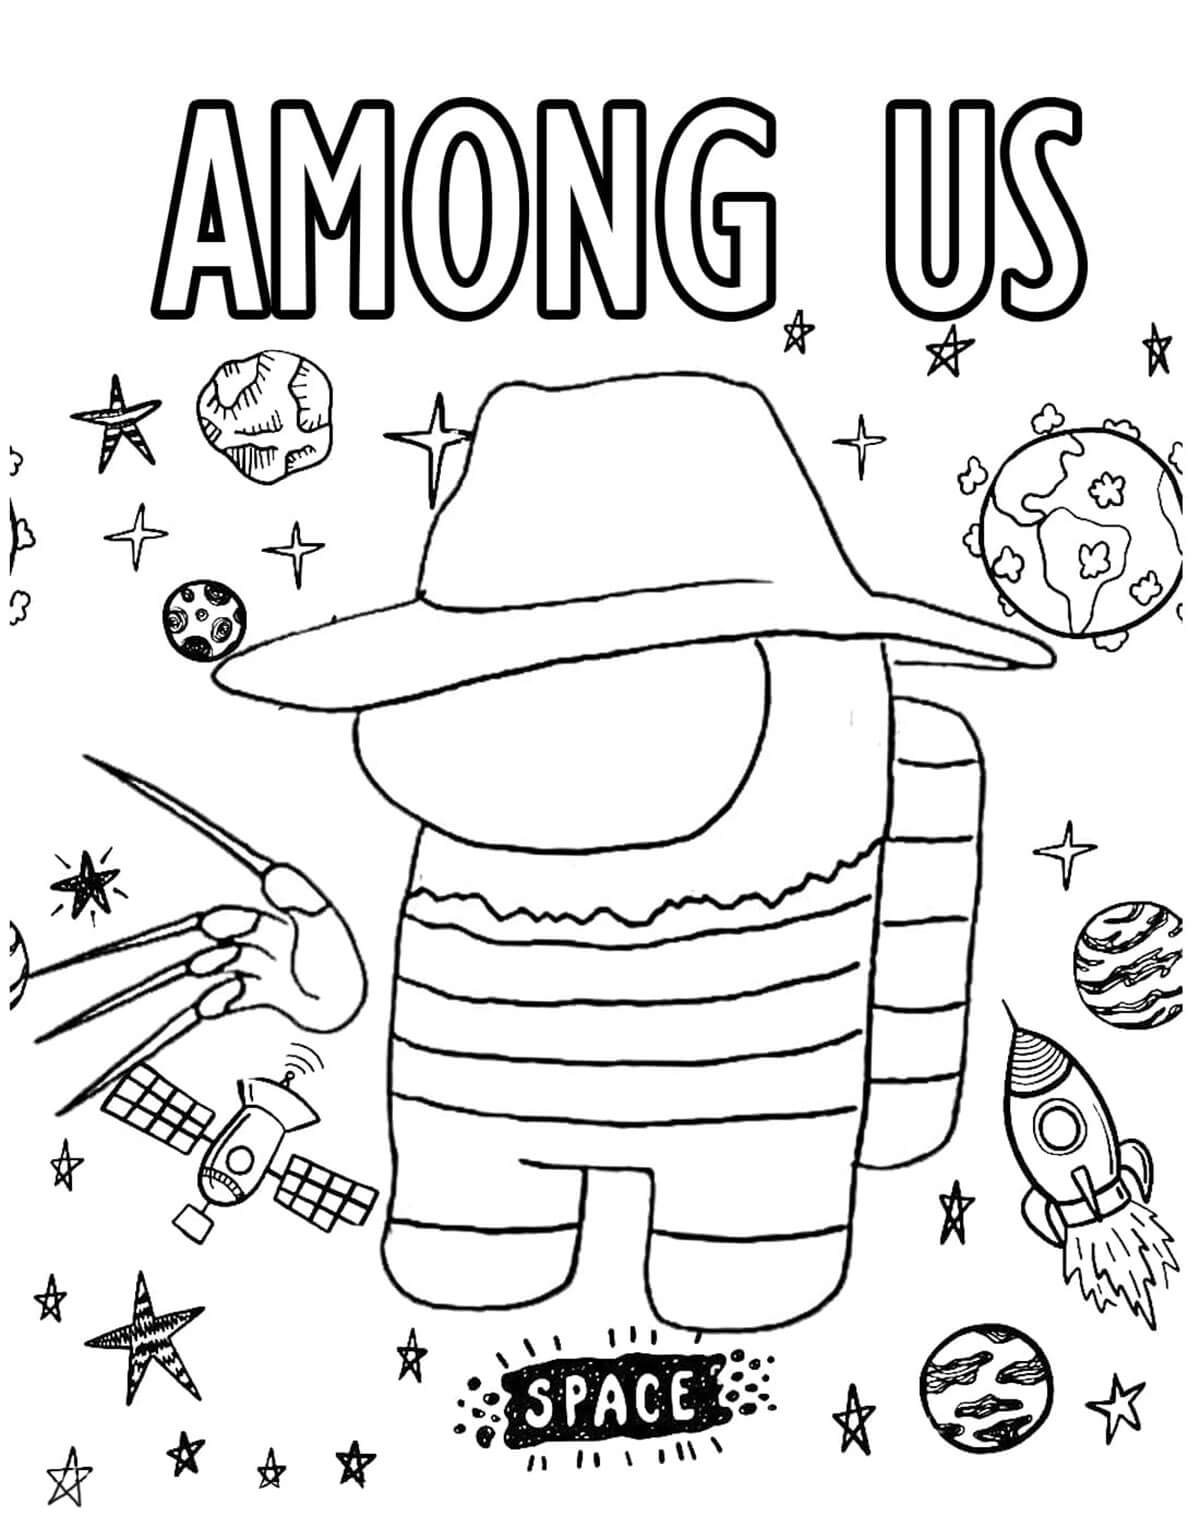 Among Us Freddy Krueger coloring page